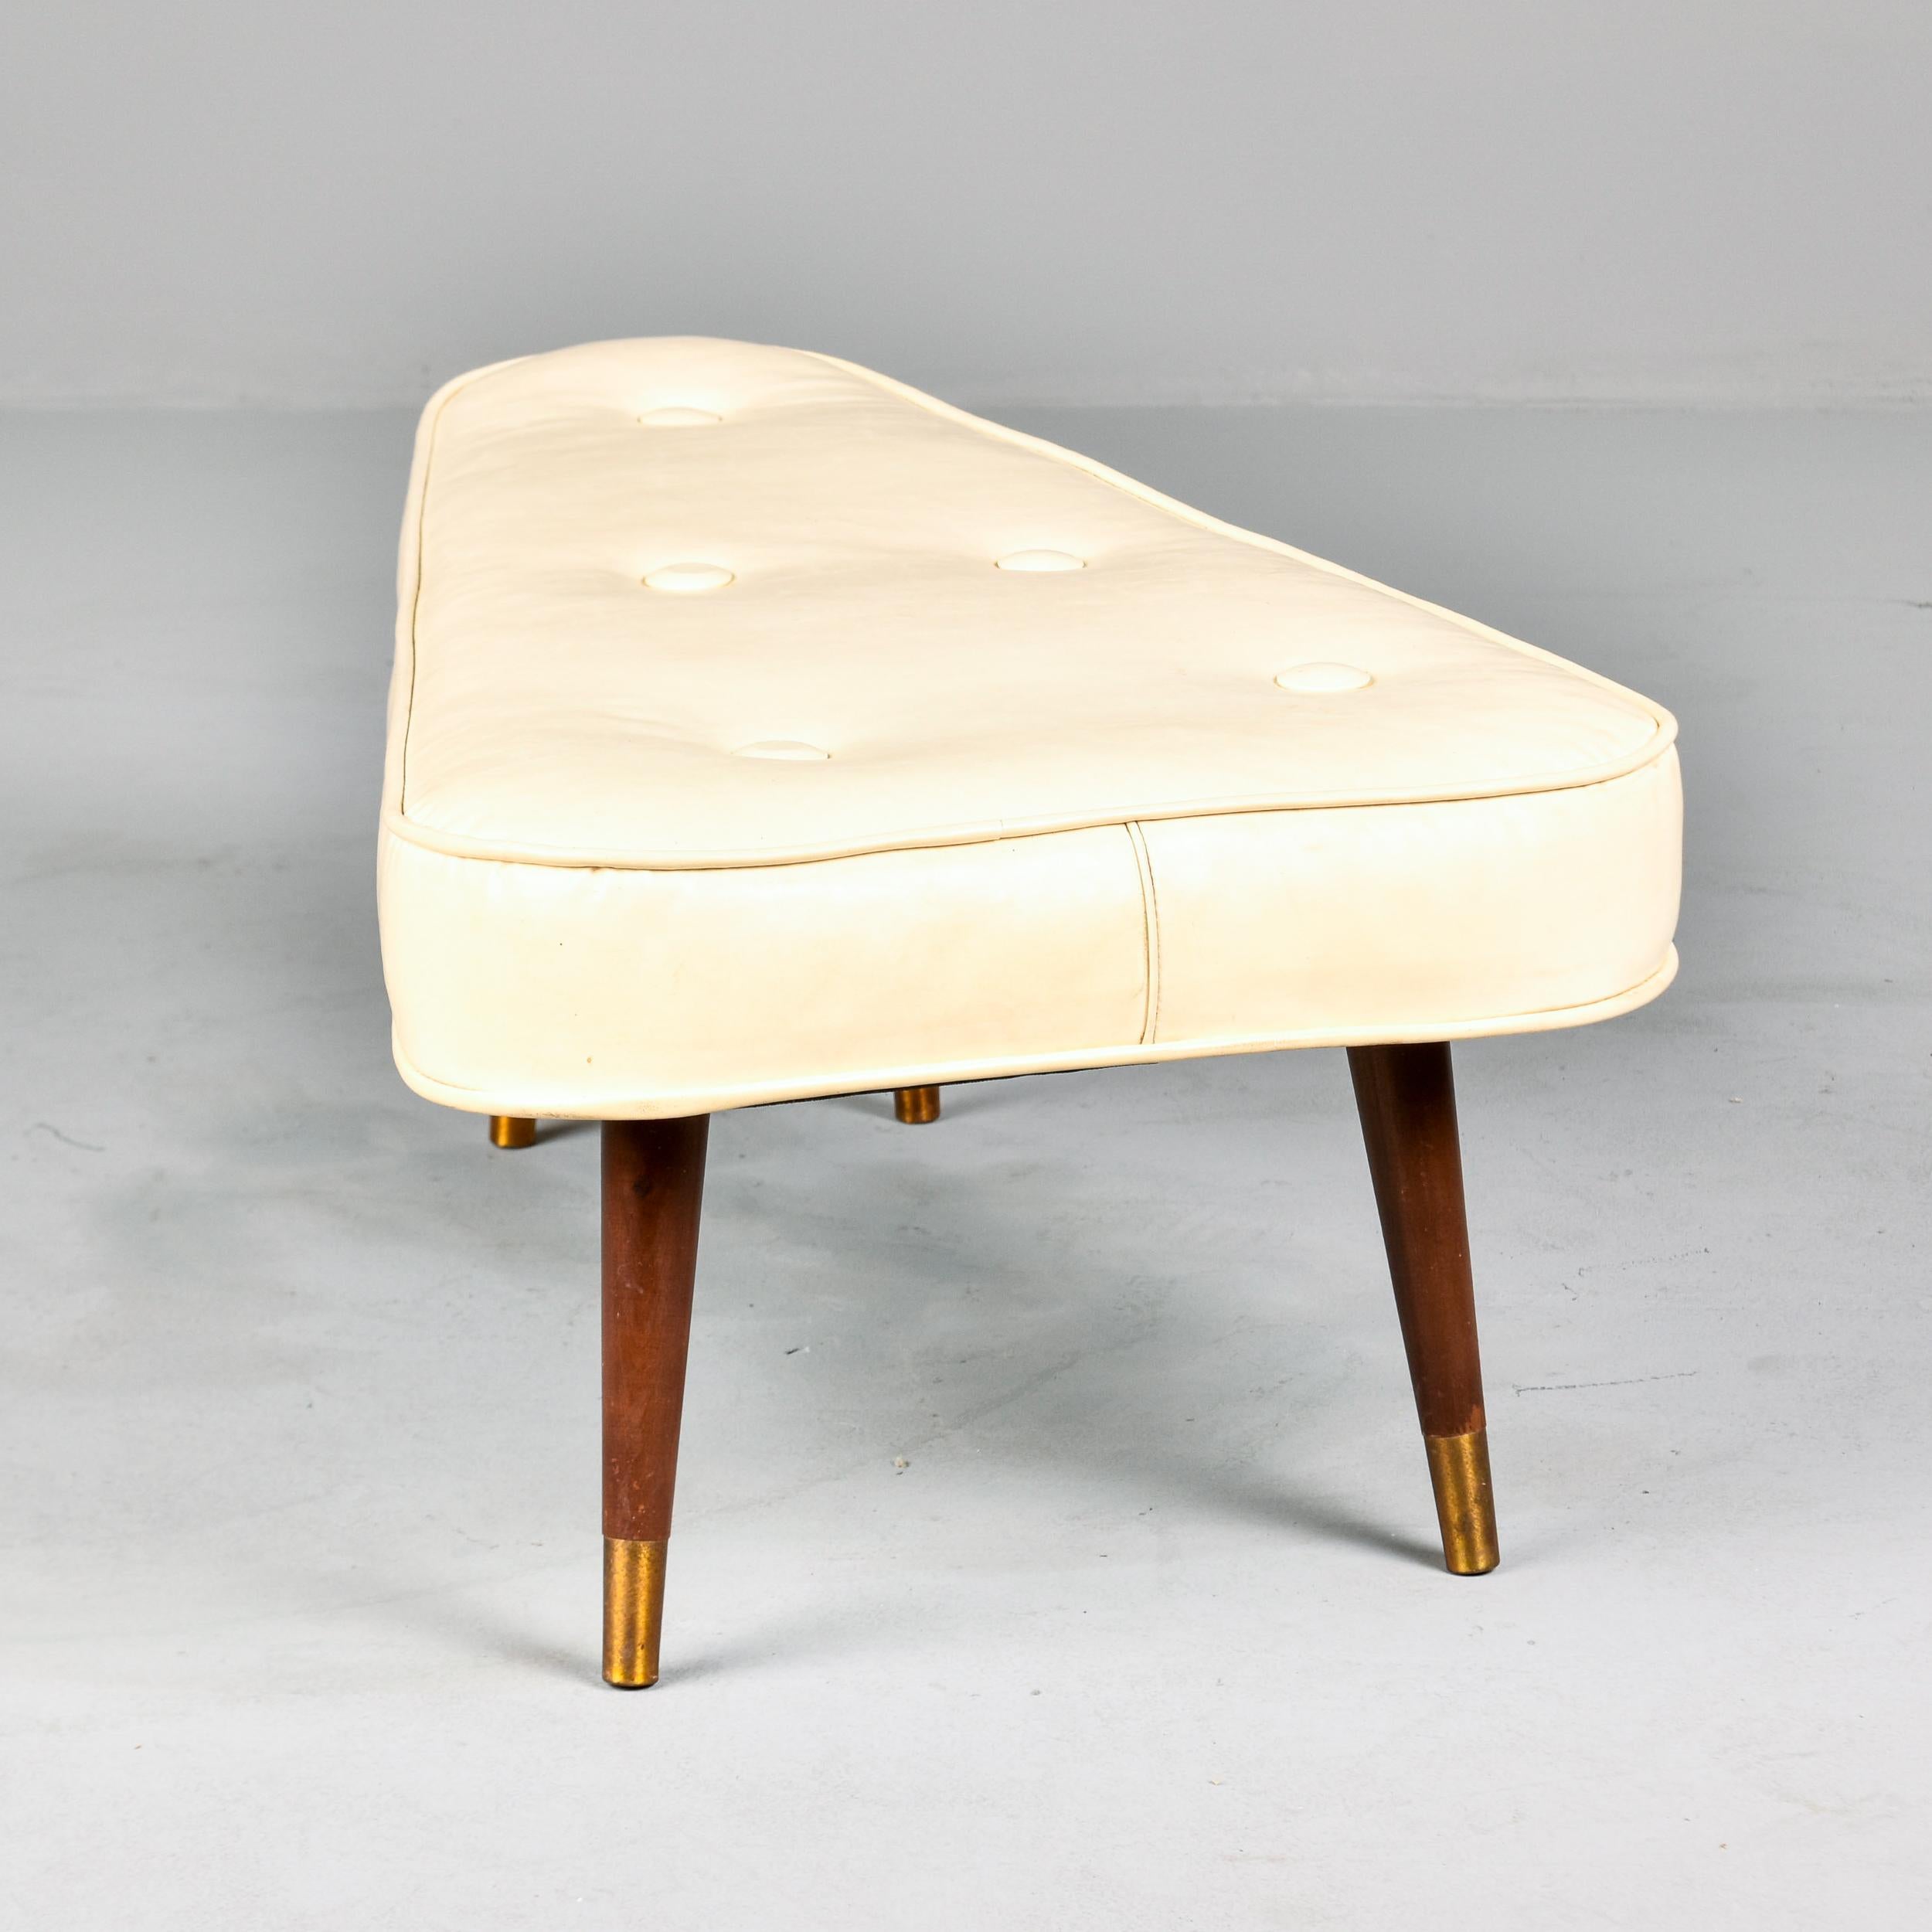 American Mid Century Triangular Atomic Upholstered Stool or Bench with Brass Tipped Legs